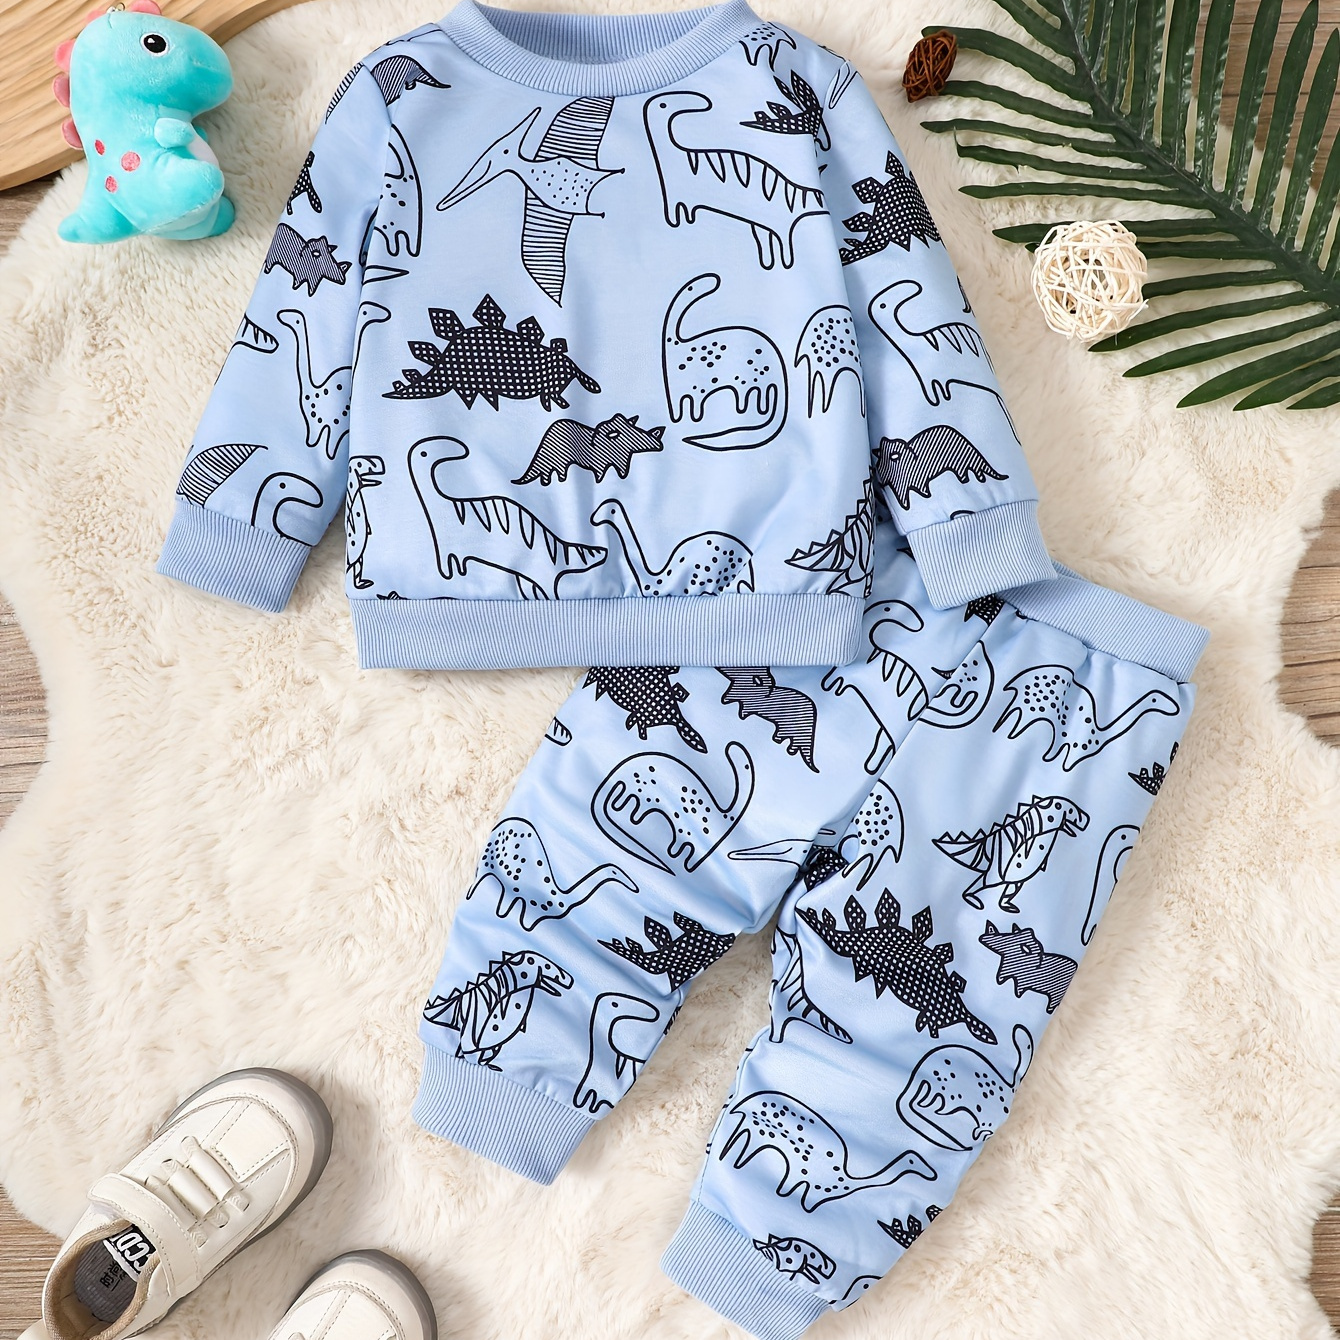 

Baby Boys Cartoon Dinosaur Allover Print Cute Outfit, Round Neck Sweatshirt With Sweatpants, 2pcs Toddlers Casual Fall Winter Clothing